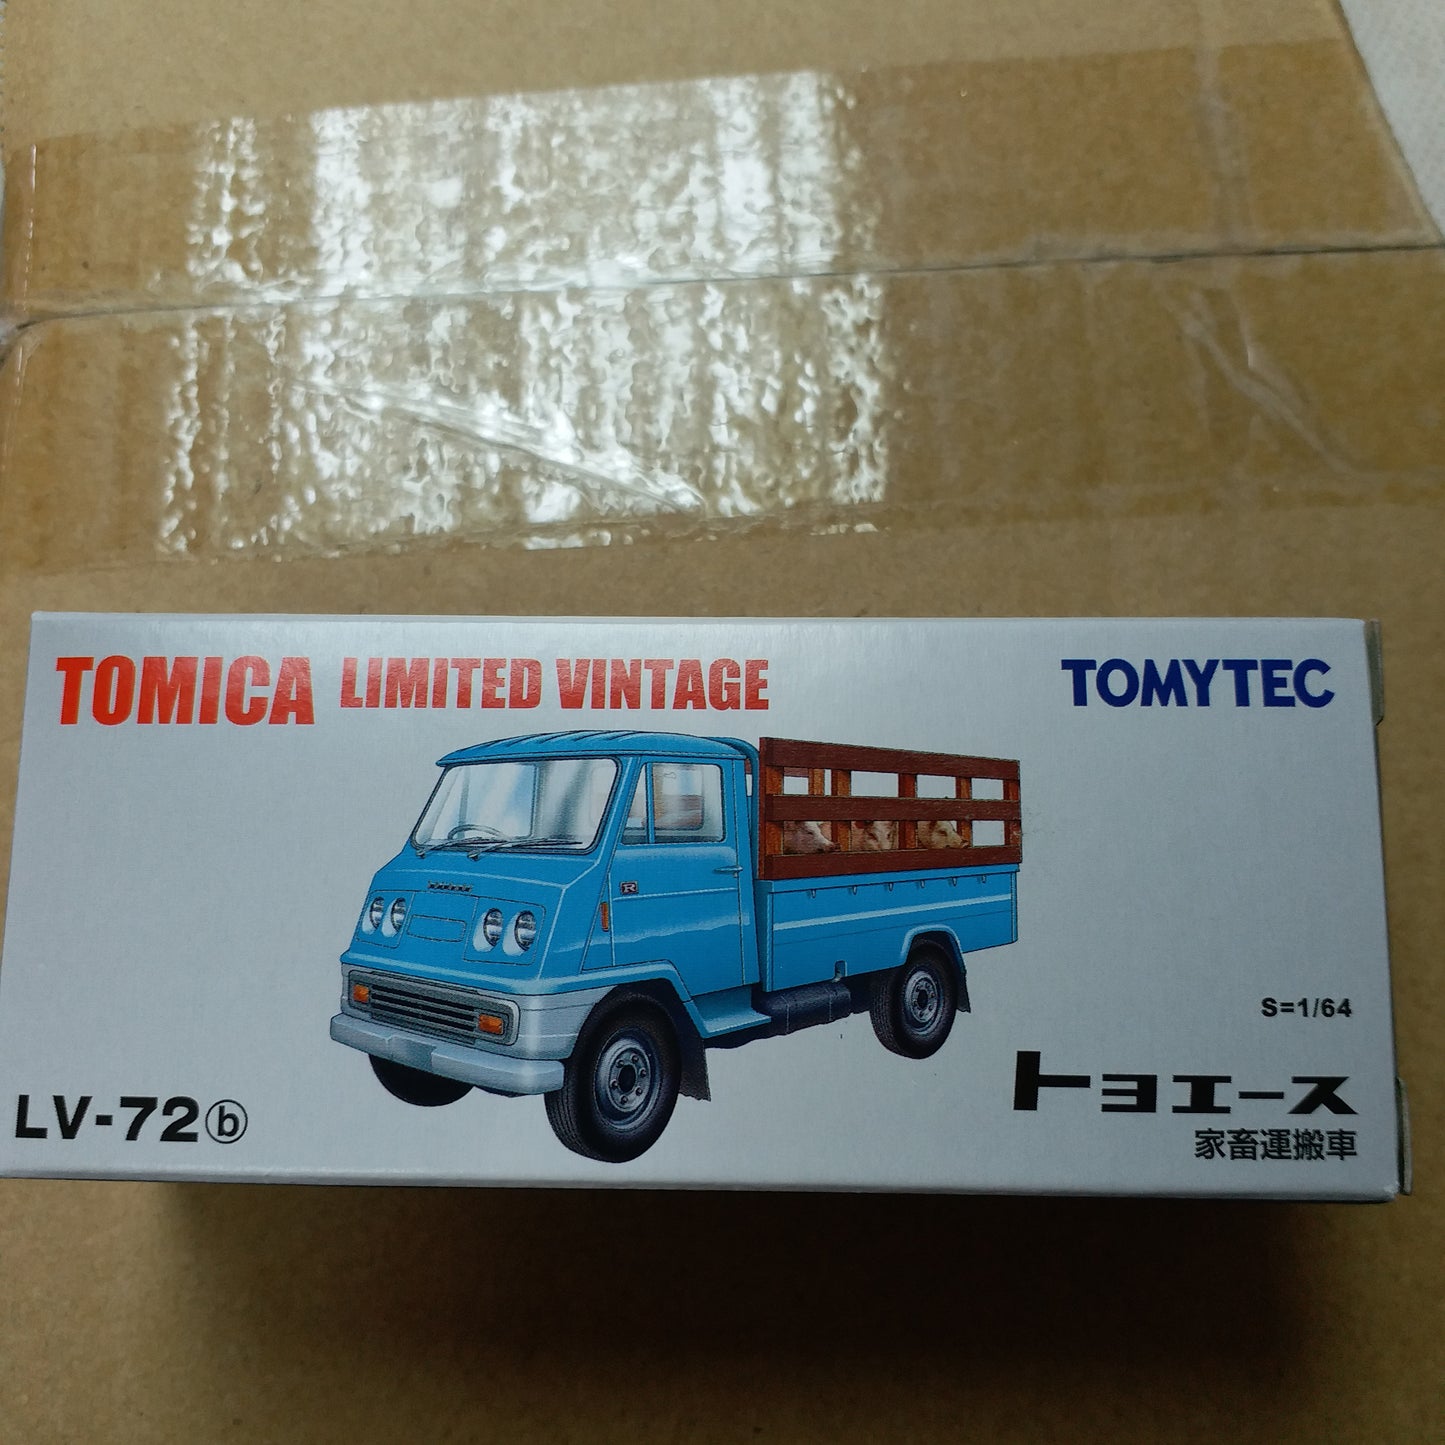 Tomica Limited Vintage LV-72b Toyoace